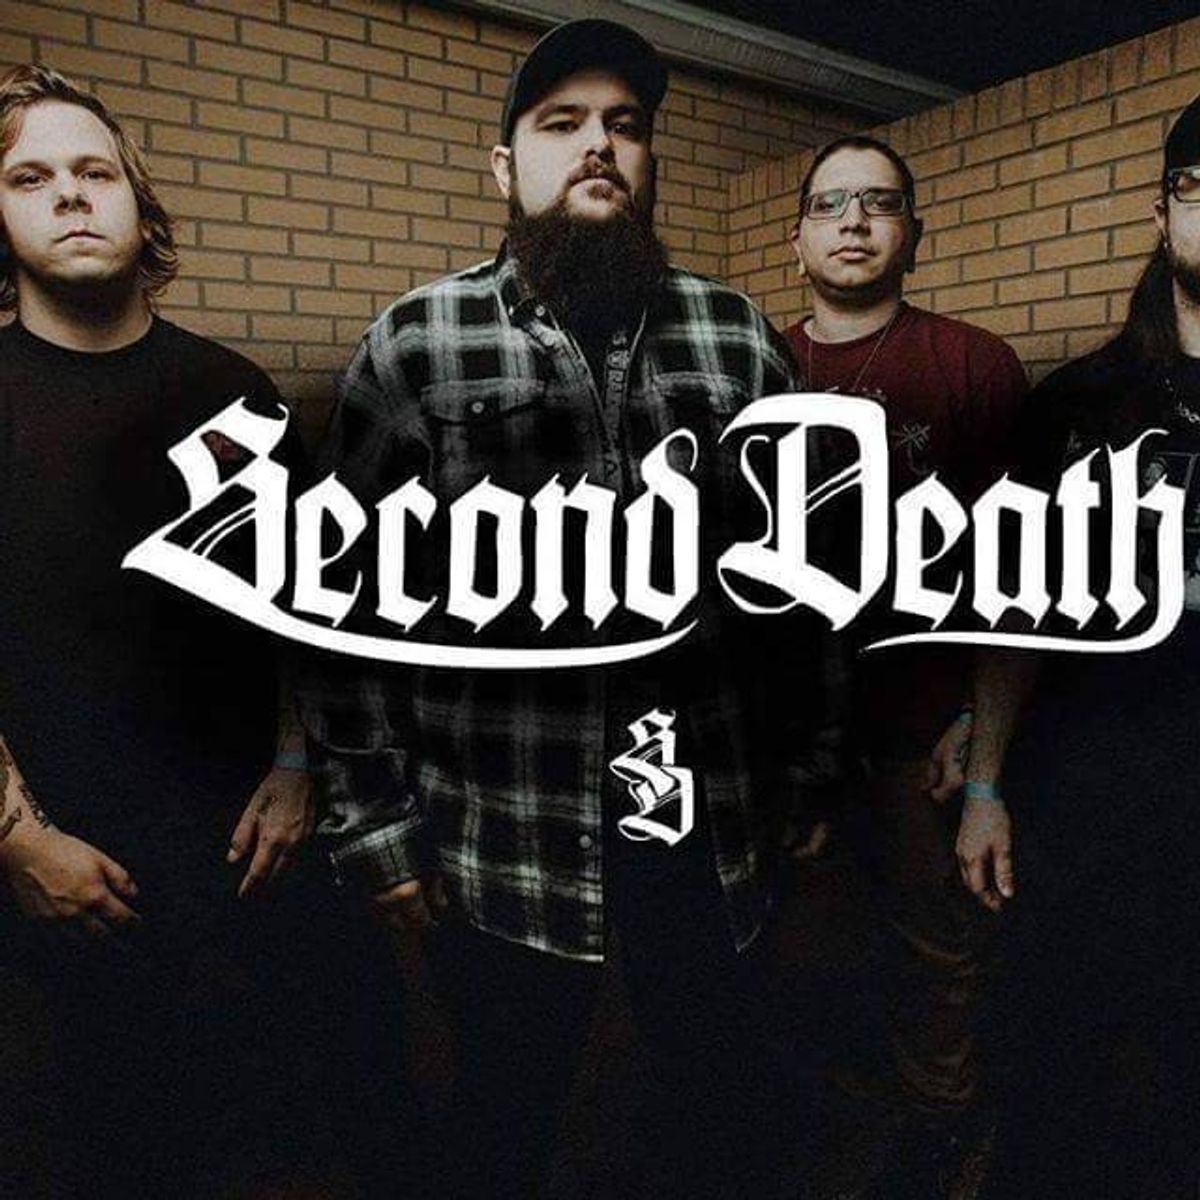 Getting To Know Second Death